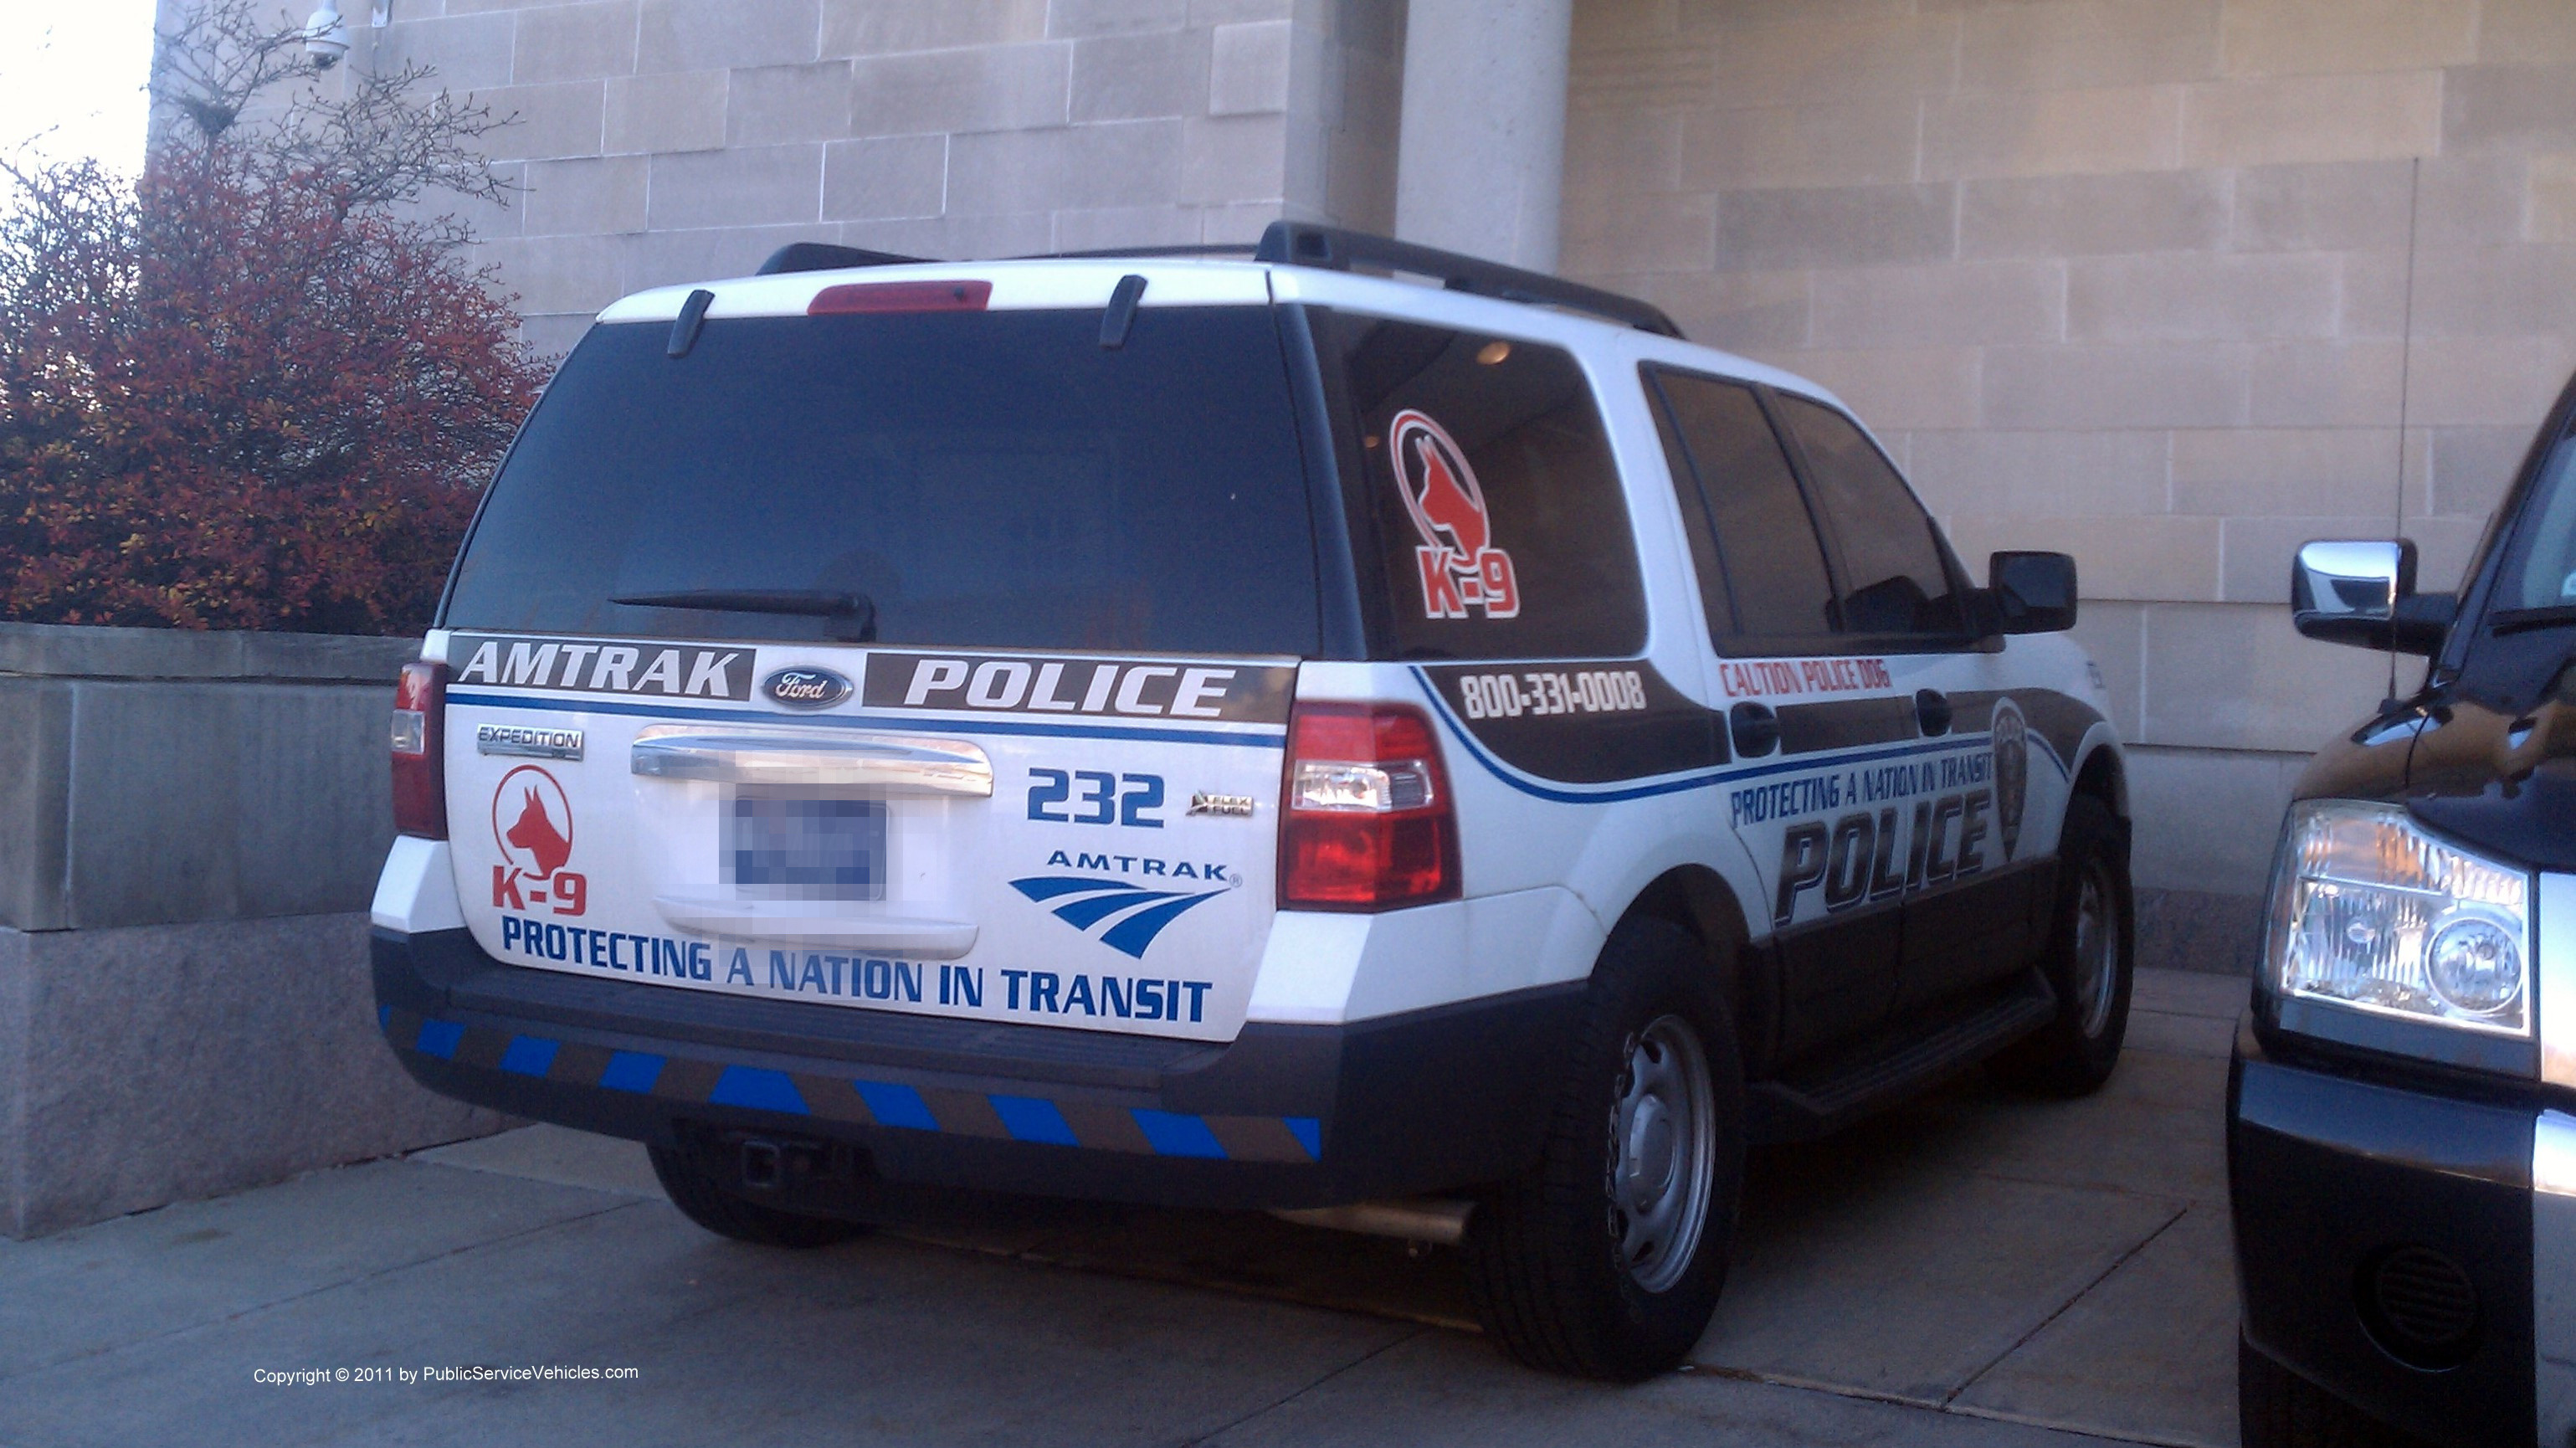 A photo  of Amtrak Police
            Cruiser 232, a 2007-2011 Ford Expedition             taken by Kieran Egan